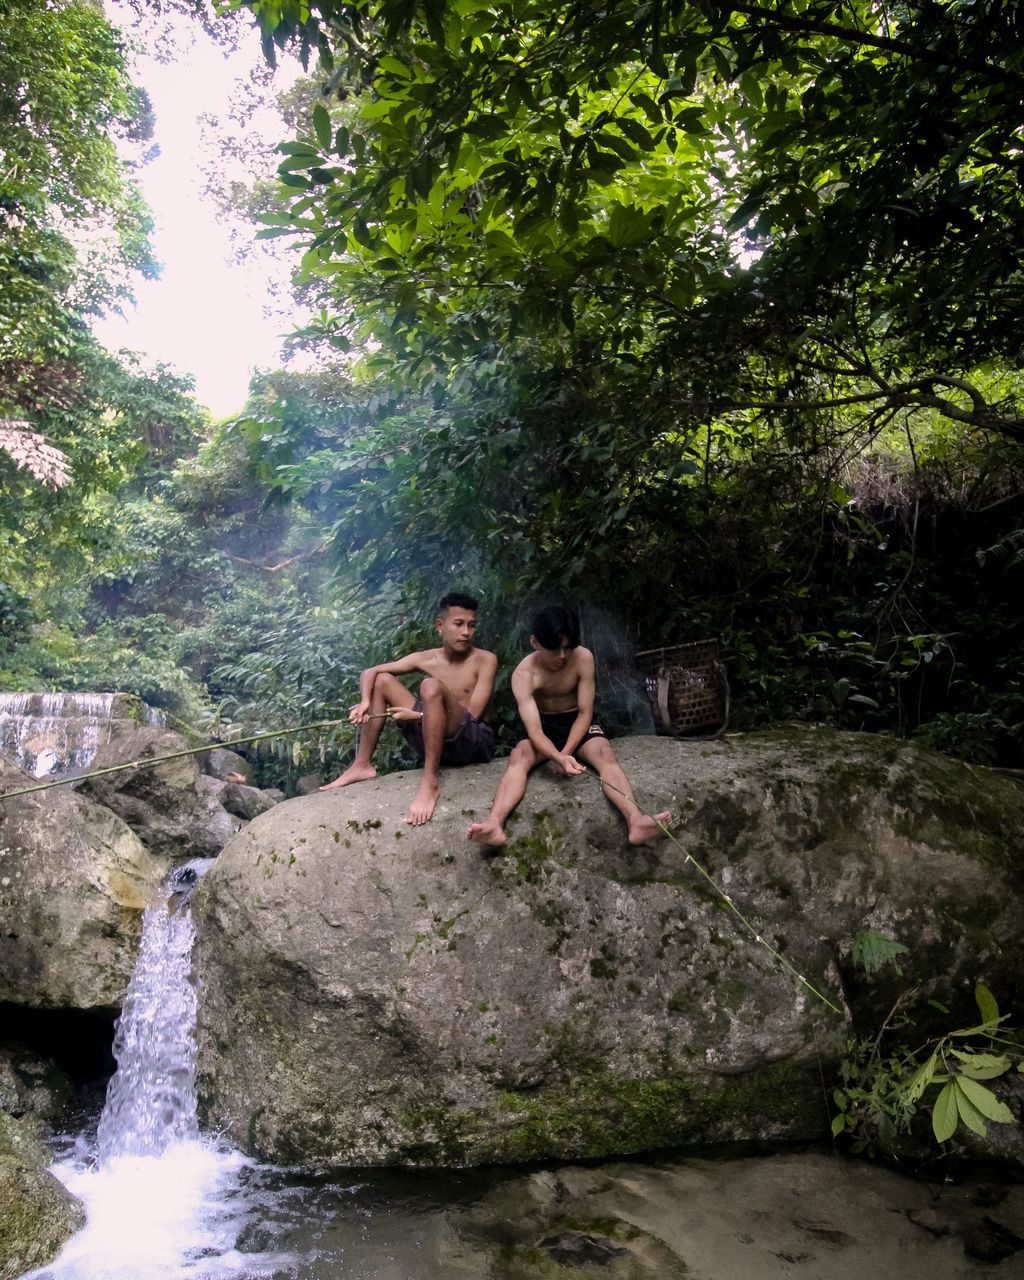 jungle, tree, waterfall, plant, water, nature, water feature, rock, leisure activity, togetherness, river, forest, adult, wilderness, rainforest, women, stream, two people, men, young adult, friendship, person, beauty in nature, trip, lifestyles, enjoyment, vacation, day, land, holiday, full length, body of water, female, outdoors, adventure, emotion, fun, bonding, happiness, child, positive emotion, motion, sitting, travel, scenics - nature, relaxation, childhood, activity, summer, clothing, environment, family, smiling, casual clothing, non-urban scene, swimwear